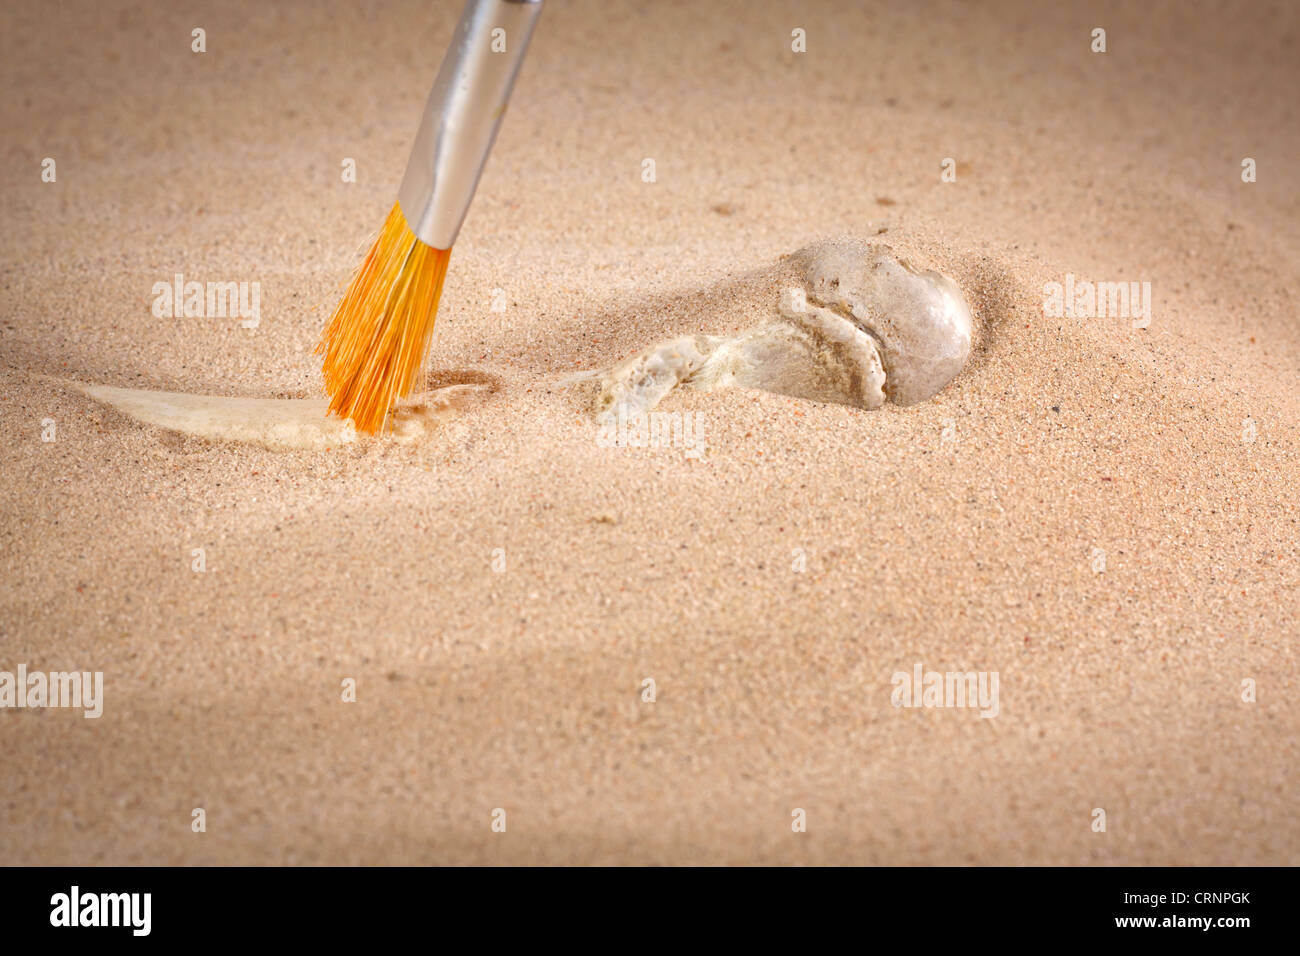 Archeology and forensics bones in sand with brush Stock Photo